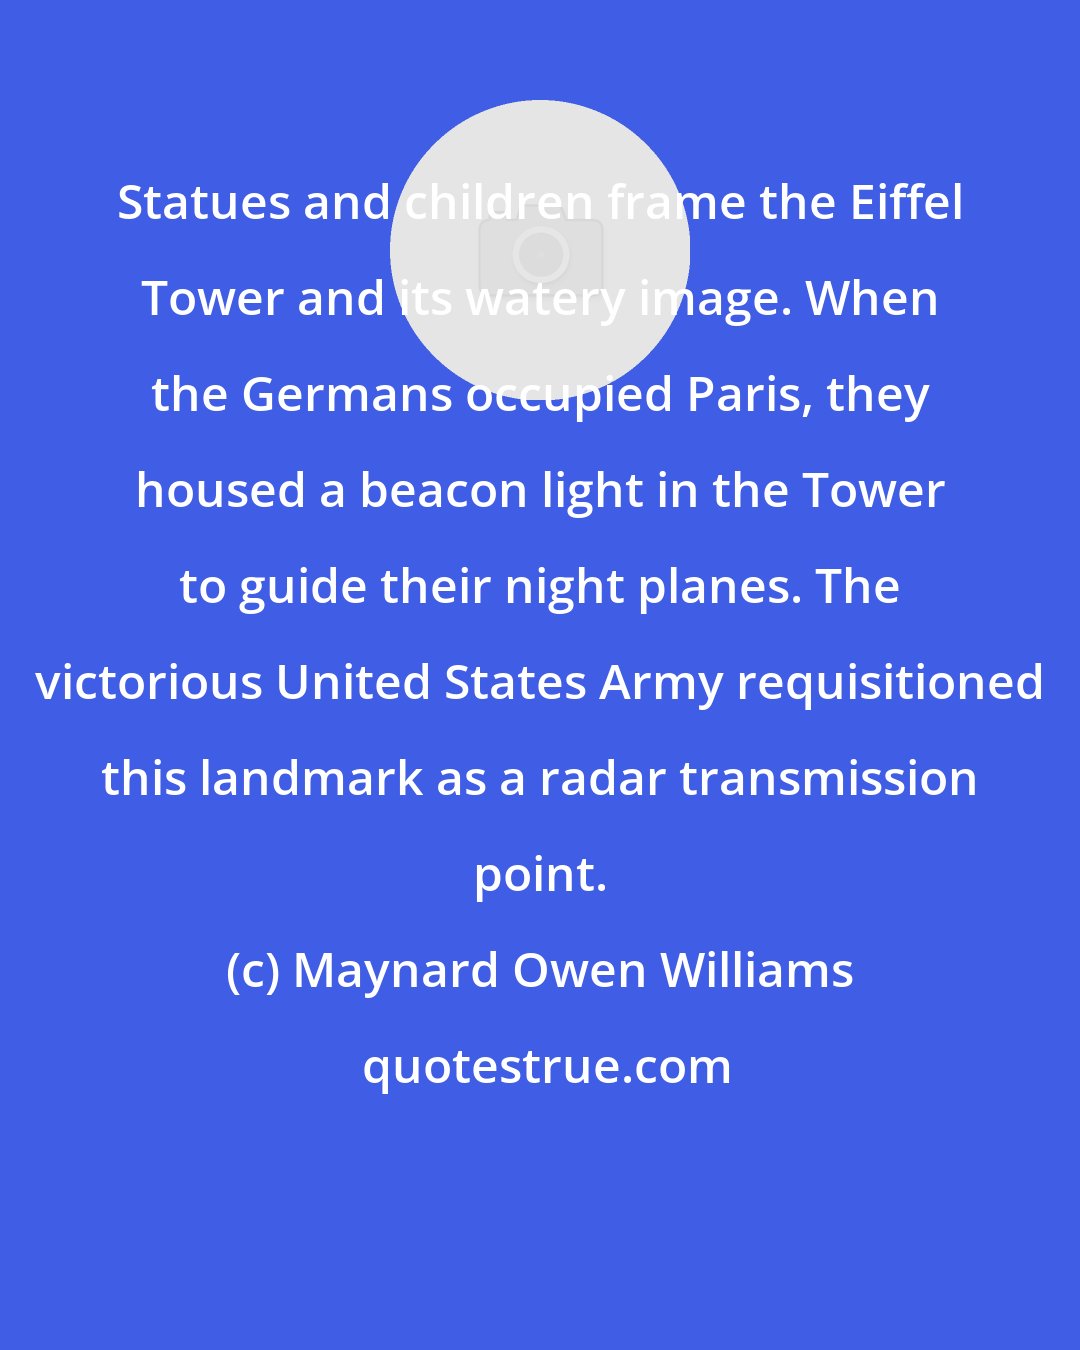 Maynard Owen Williams: Statues and children frame the Eiffel Tower and its watery image. When the Germans occupied Paris, they housed a beacon light in the Tower to guide their night planes. The victorious United States Army requisitioned this landmark as a radar transmission point.